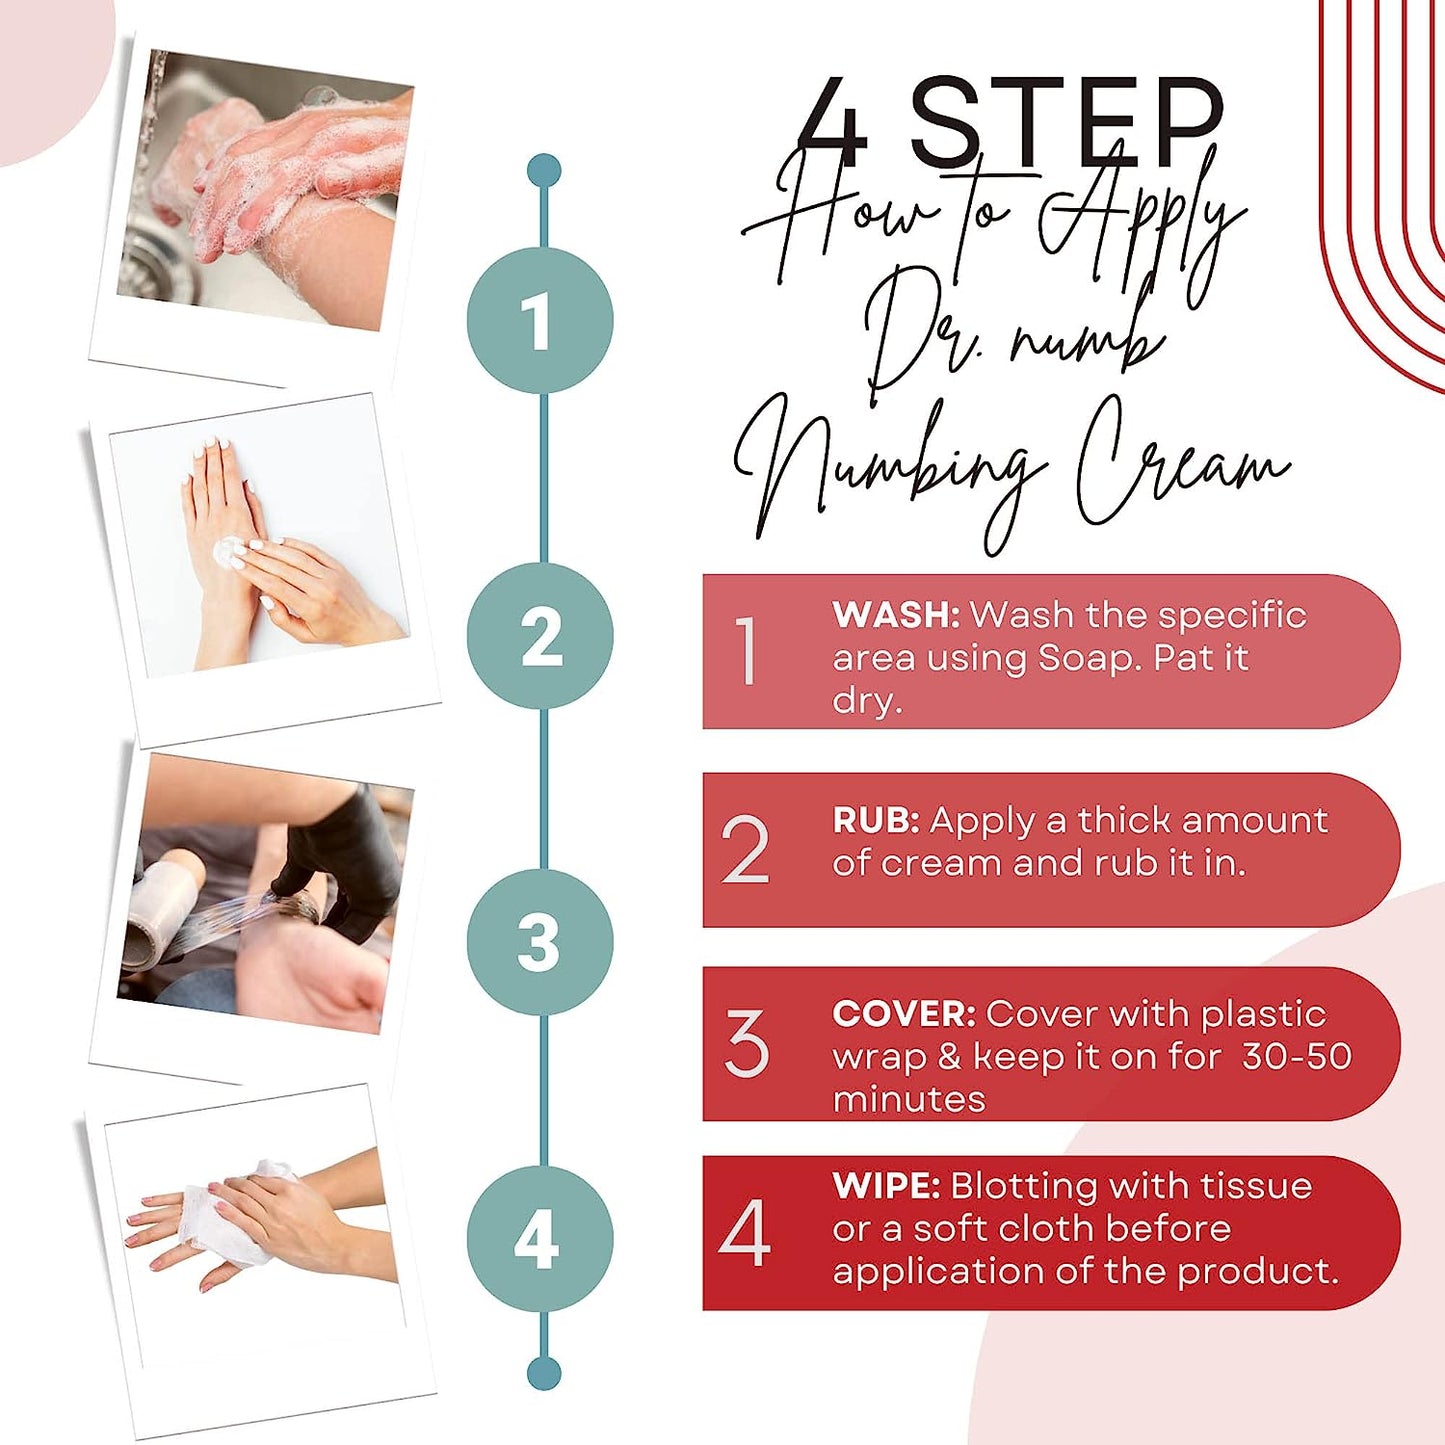 Numbing cream for waxing - Wax without the discomfort